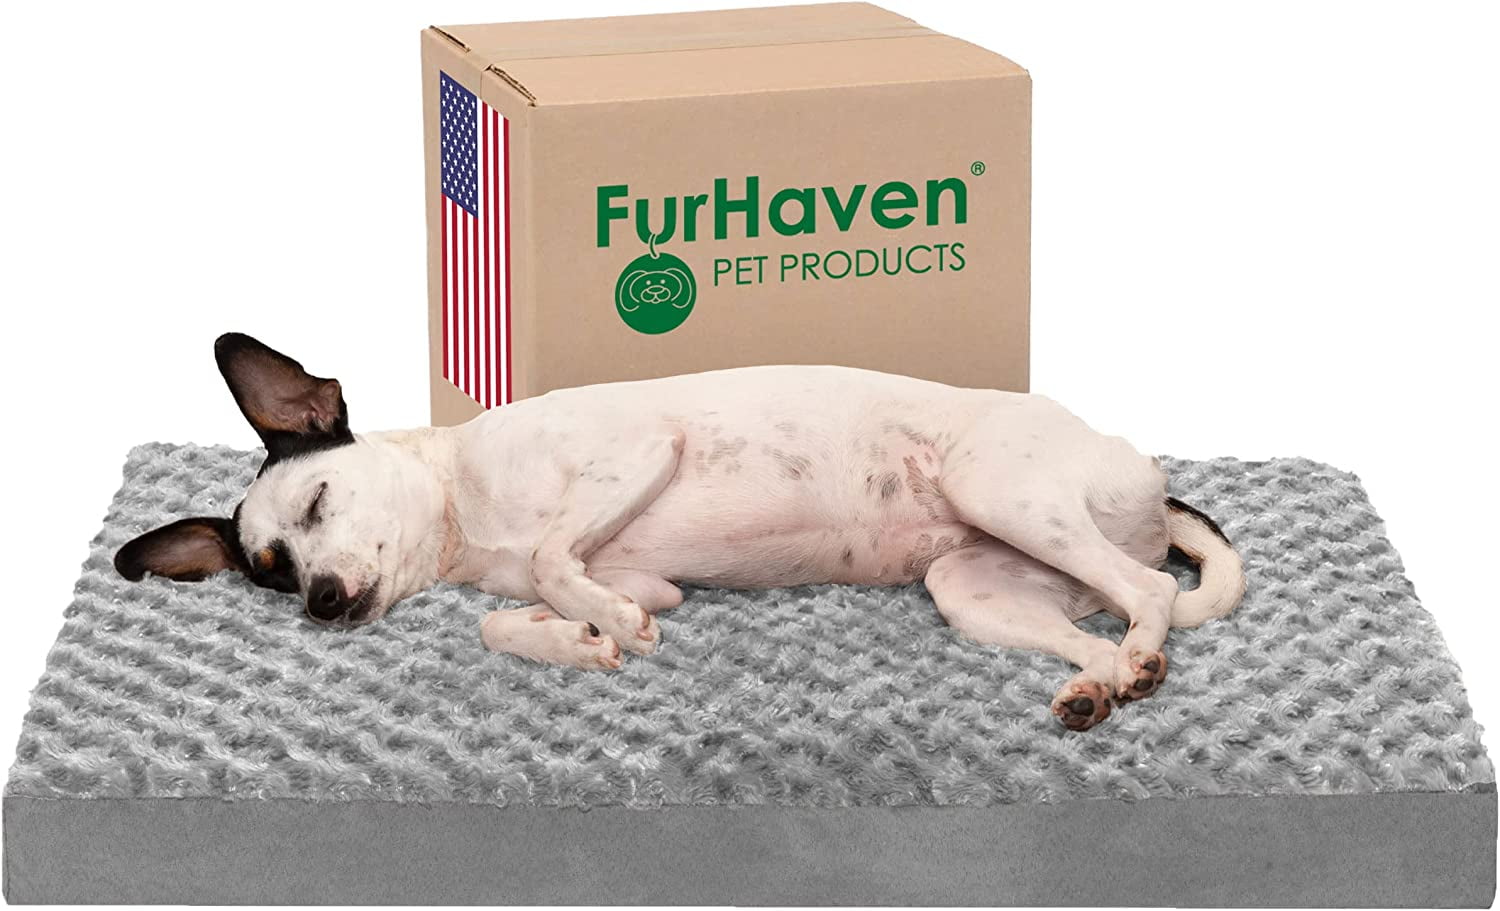 Furhaven Orthopedic Pet Bed for Dogs and Cats Classic Cushion Ultra Plush Curly Fur Dog Bed Mat with Removable Washable Cover, Cream, Jumbo (X-Large)